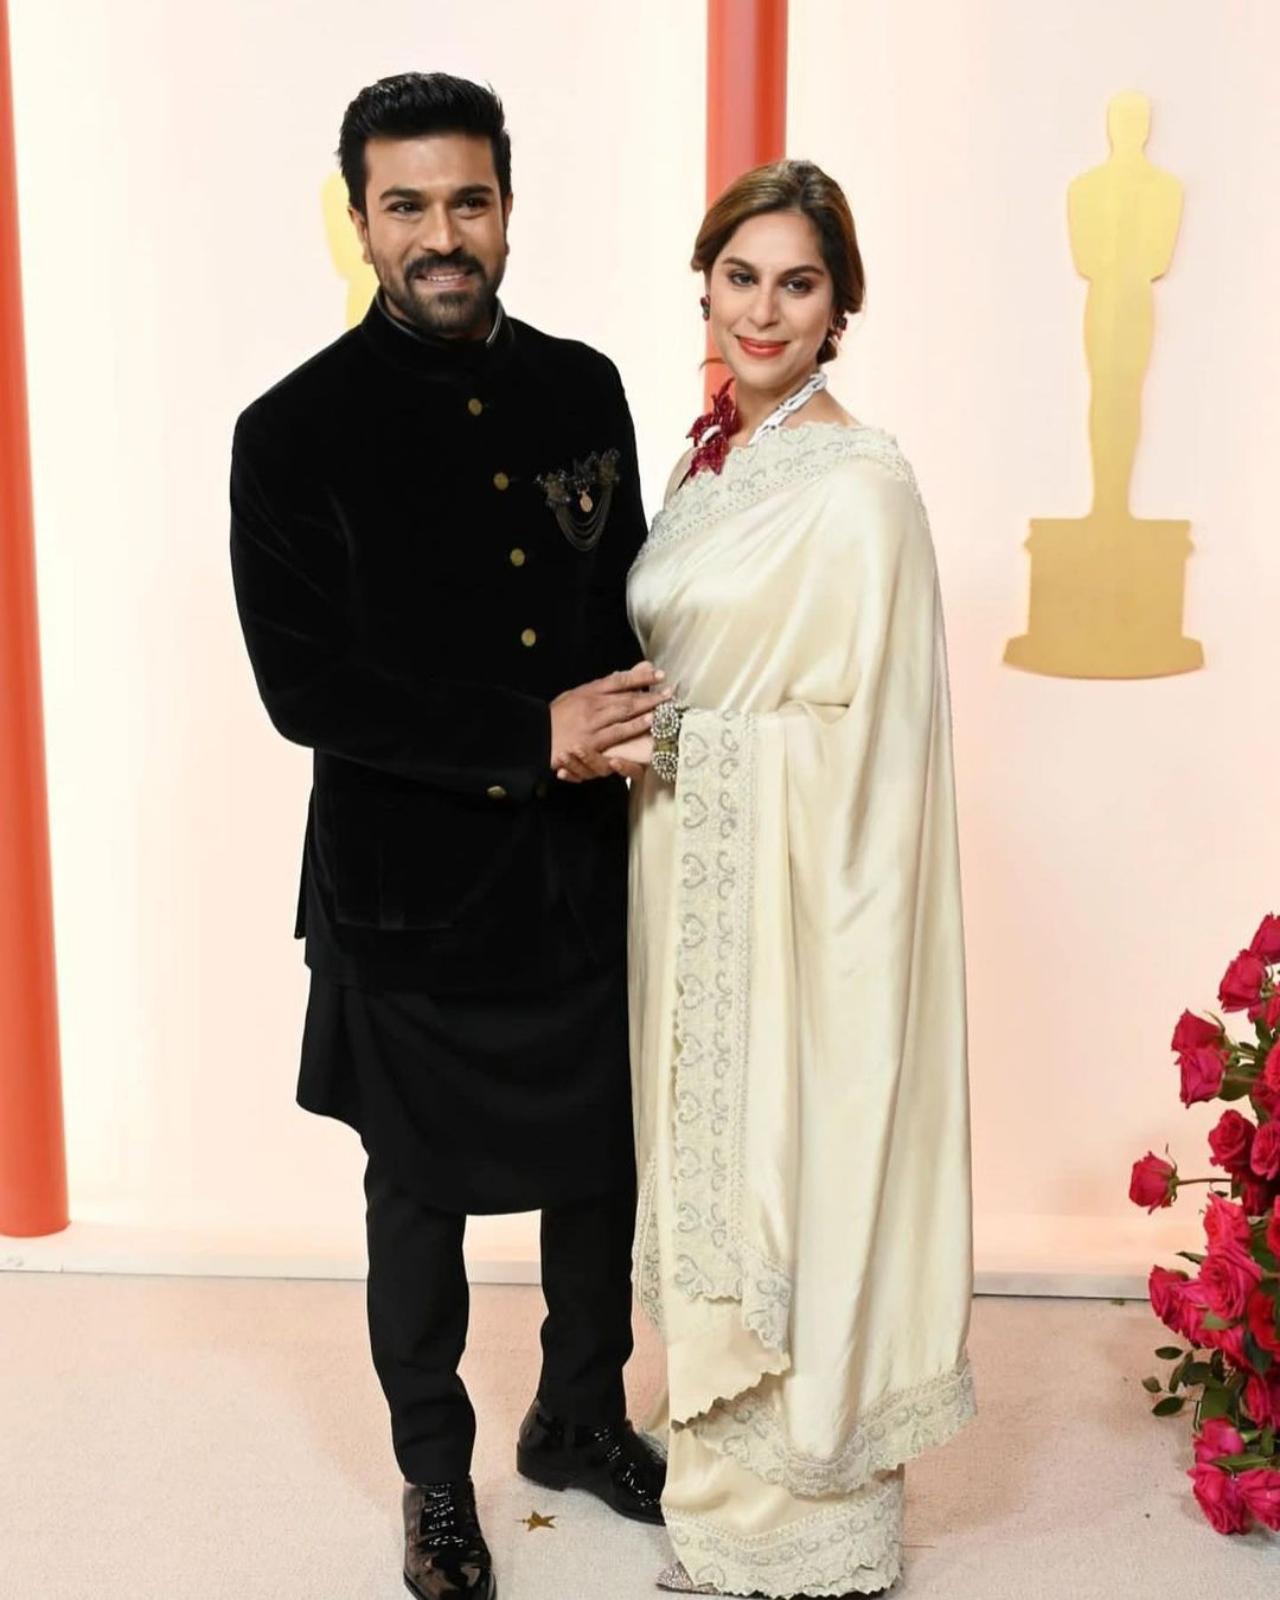 In a reflection of his character in 'RRR', Ram Charan came outfitted in an ensemble from Shantnu & Nikhil styled by Nikita Jaisinghani.